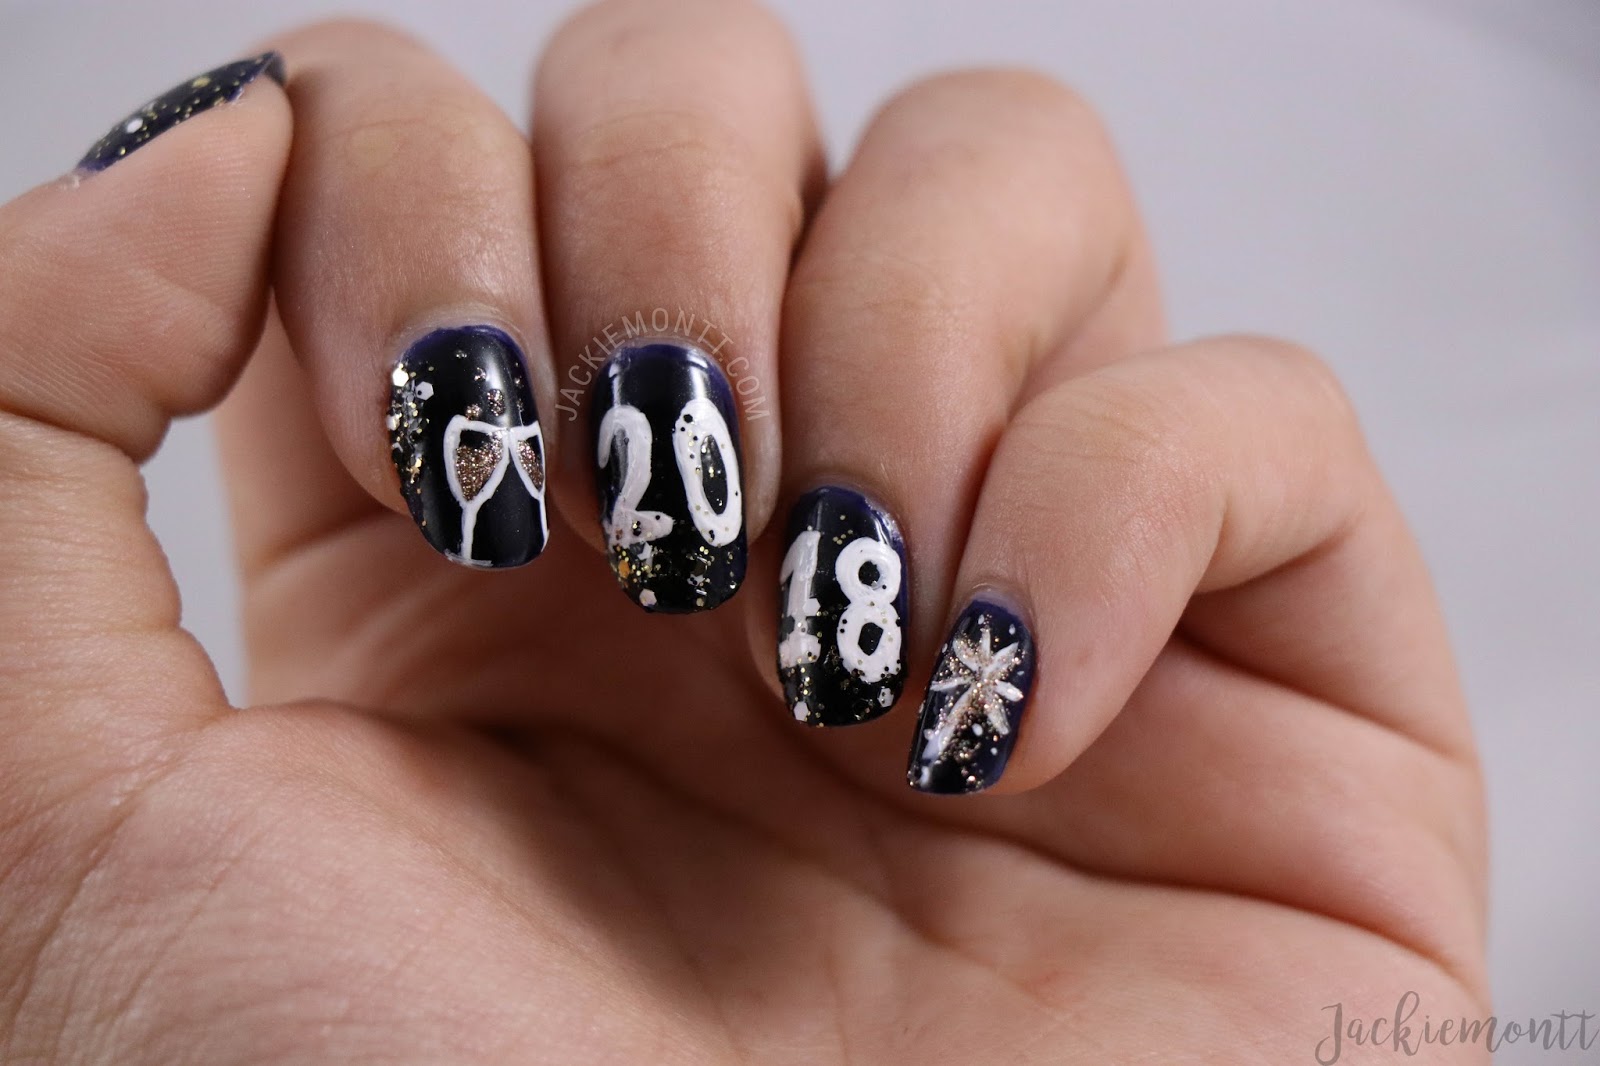 3. New Year's Nail Designs for January - wide 6